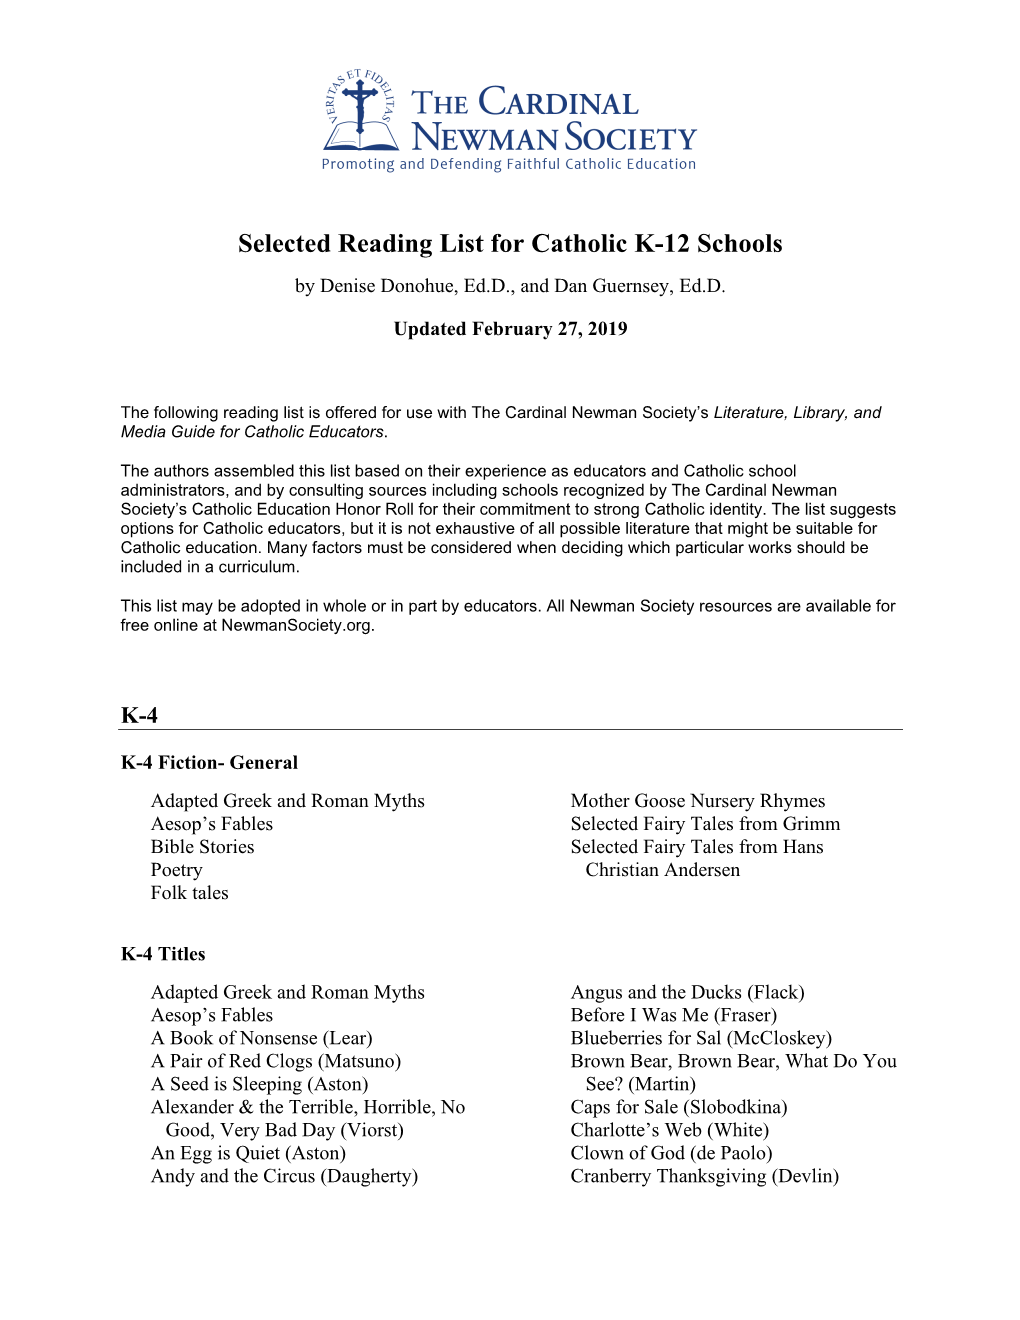 Selected Reading List for Catholic K-12 Schools by Denise Donohue, Ed.D., and Dan Guernsey, Ed.D